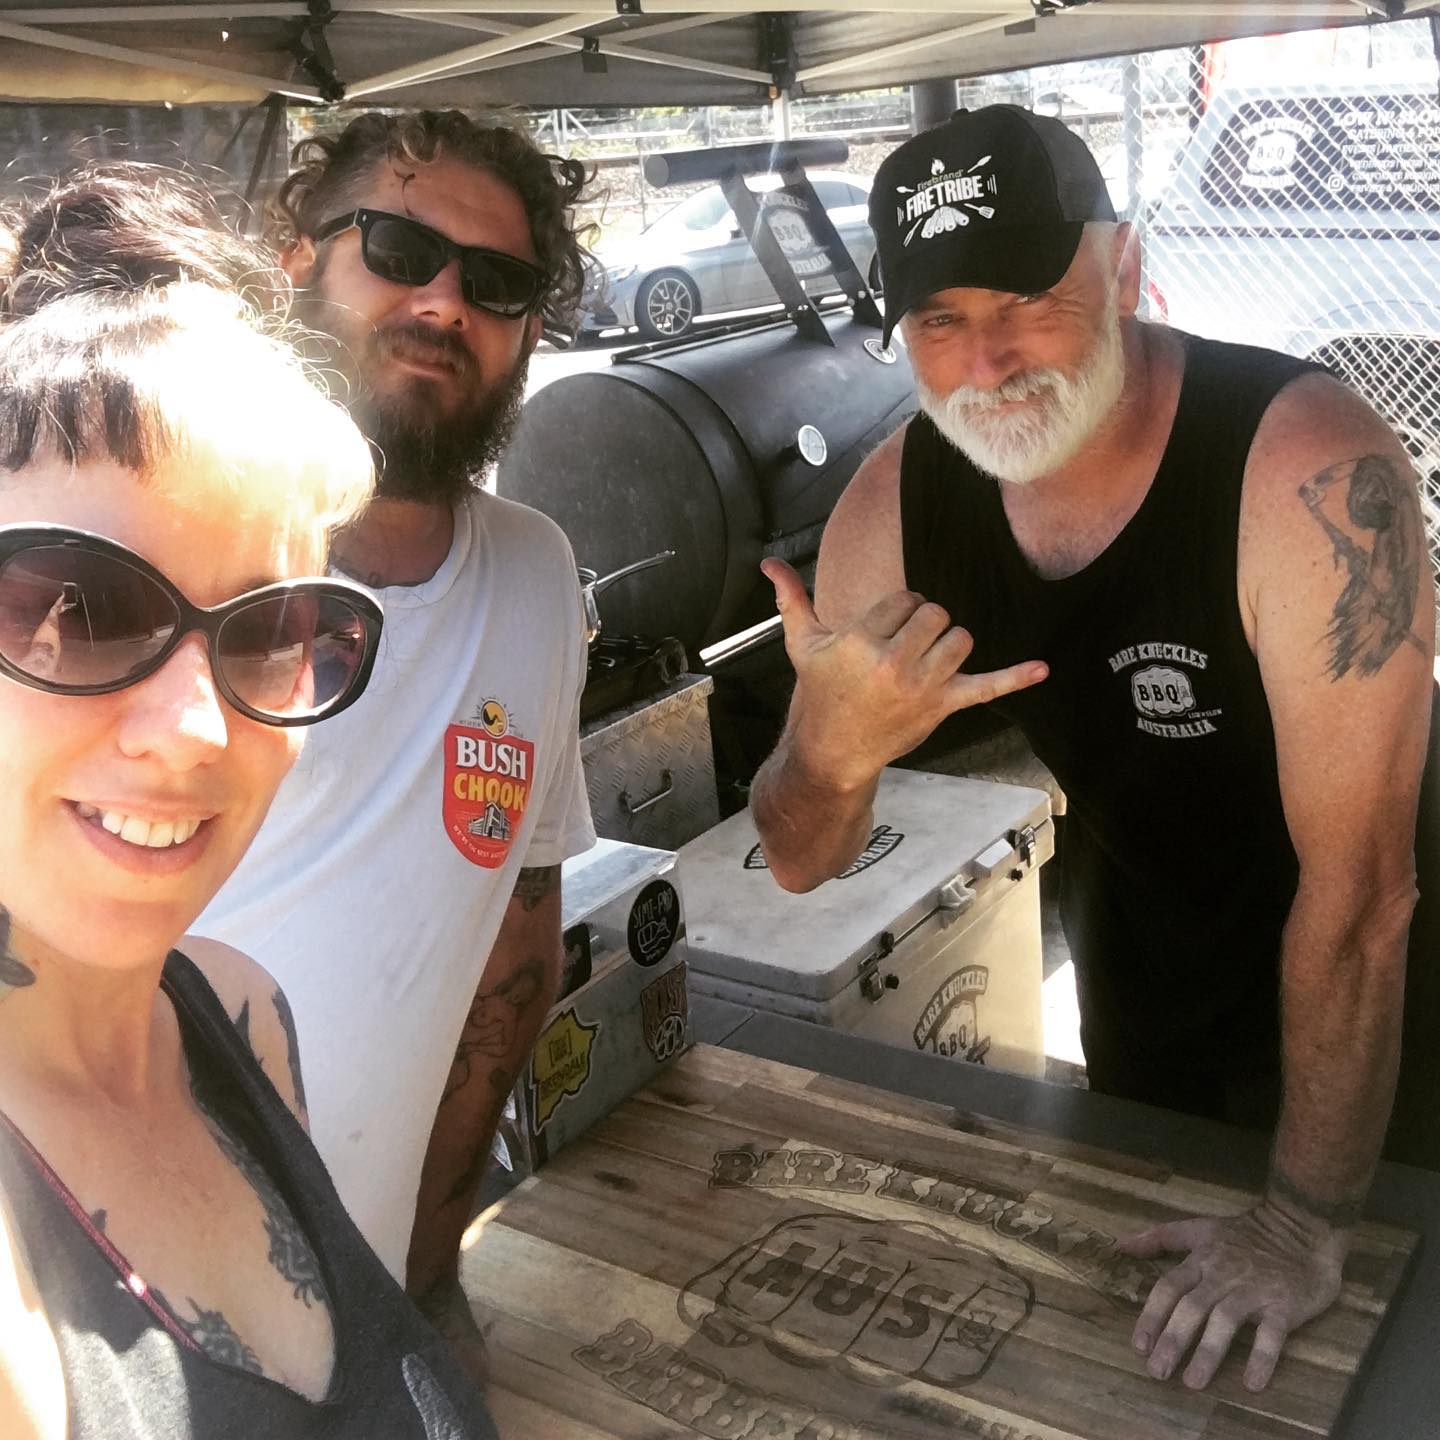 Two of my favorite peeps visiting me at @hubbrewing today @bettiebutcher and @rastralyall - great friends.. and awesome supporters.. of whatever I do !! I love seeing your faces.. 🏻 - can’t wait till March 1st !!!! Thanks crew... -#getsome #lownslow #lownslowbbq #barbeque #barbecue #itsgoodbbq #brisket #pork #lamb #chicken #brisbane #queensland #australia #sleepwhenimdead #allinnbrewingco #traditionalbbq #bareknucklesbbq #bareknucklesbarbeque #bareknucklesbarbecue